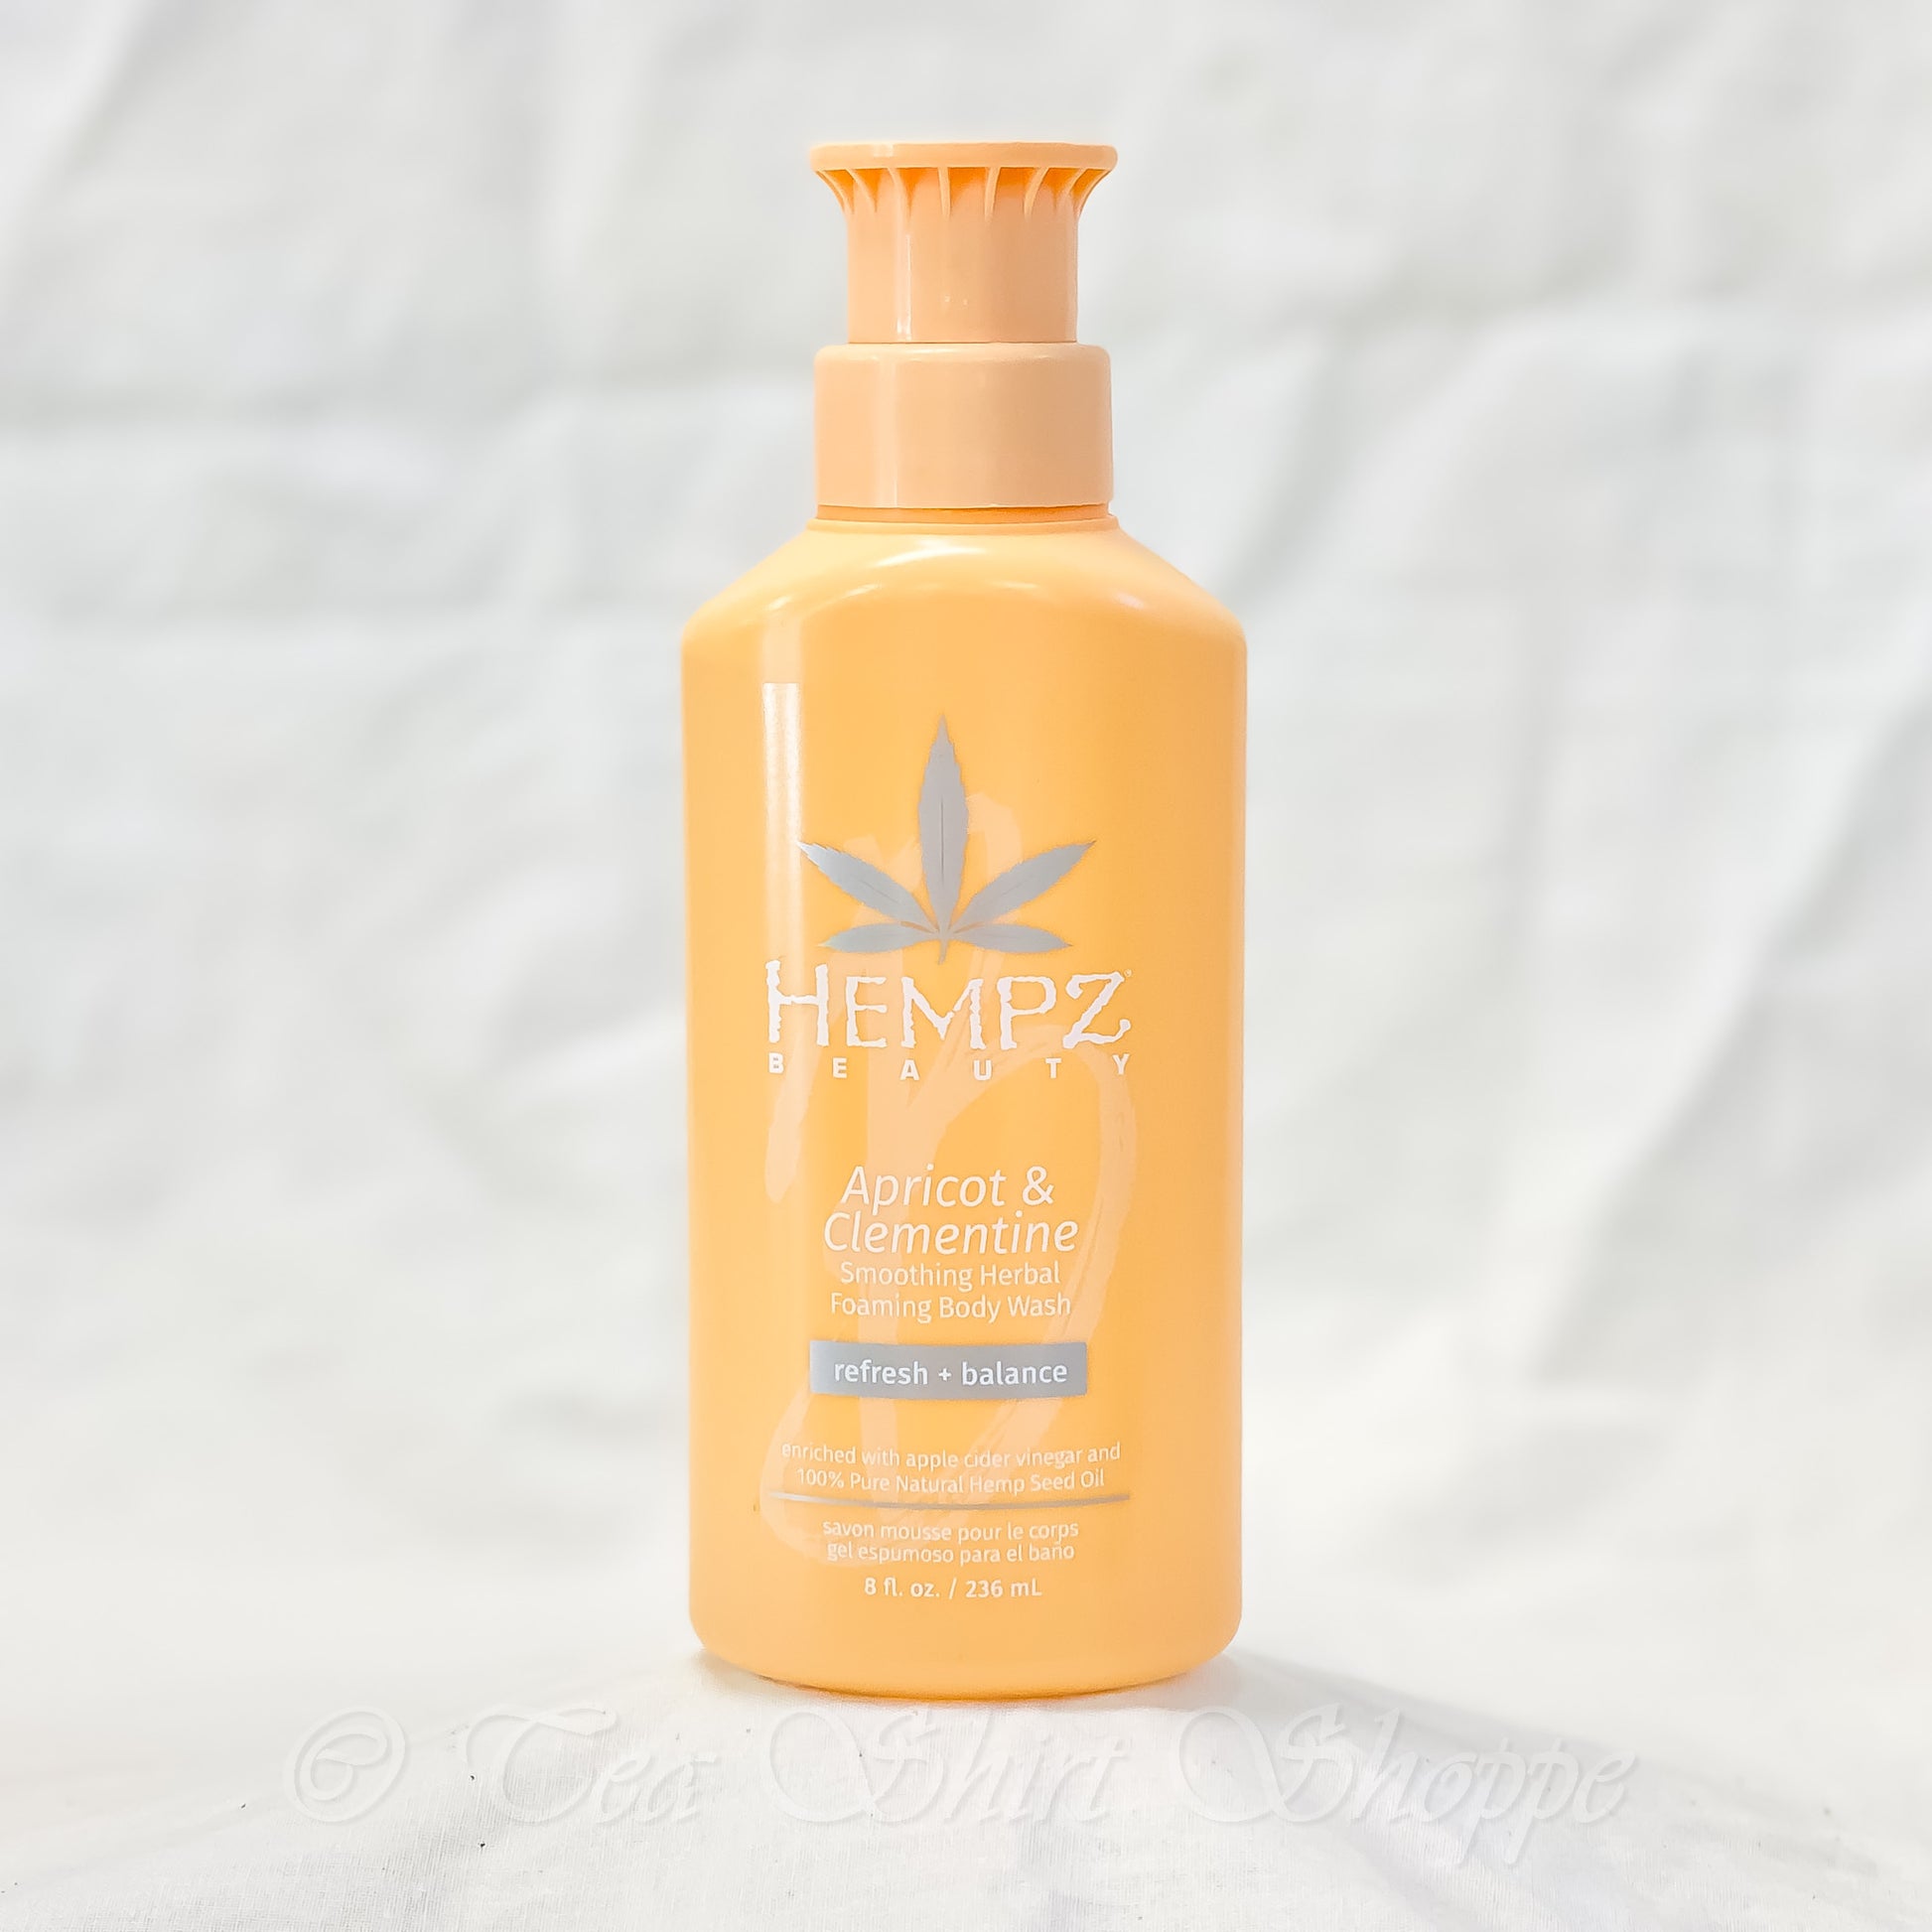 leaves skin feeling refreshed and cleansed without stripping the skin of its natural moisture.  Benefits:   Refreshing lightweight foam cleanses and nourishes skin with a gentle, rich lather  Subtle sweet, perfume notes of Apricot & Clementine leave skin refreshed and lightly scented